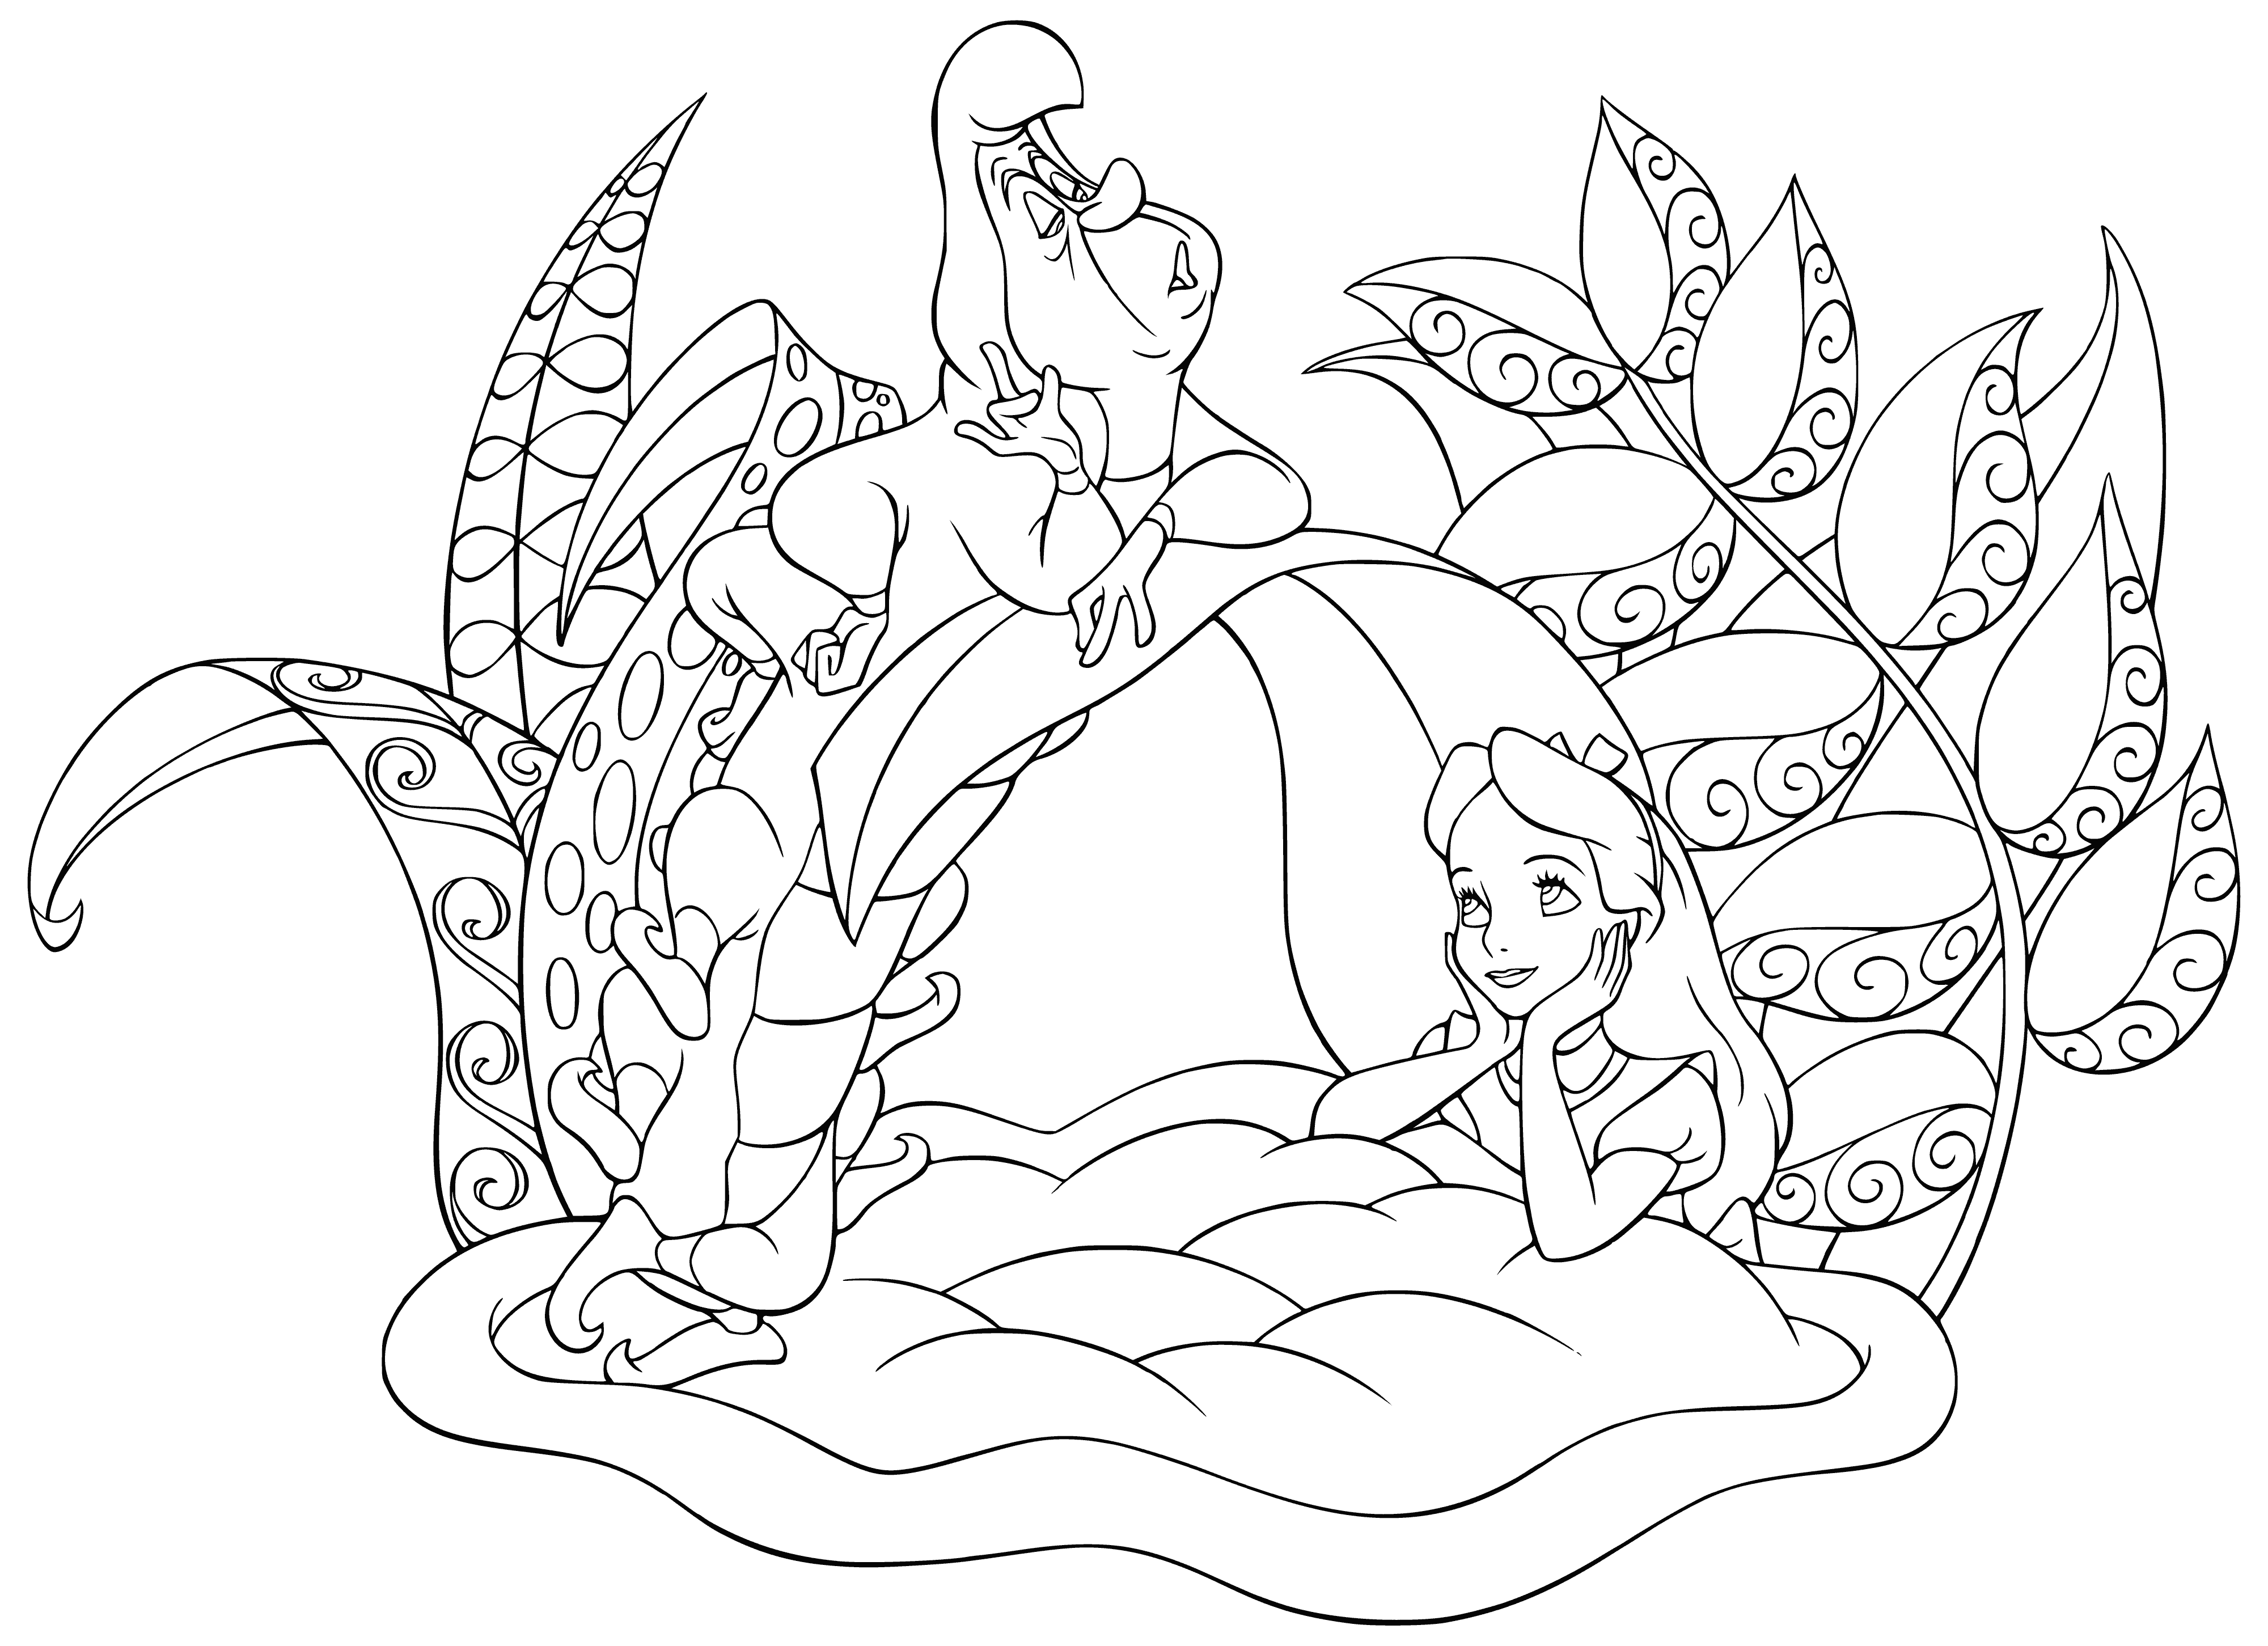 Alice meets the Caterpillar coloring page